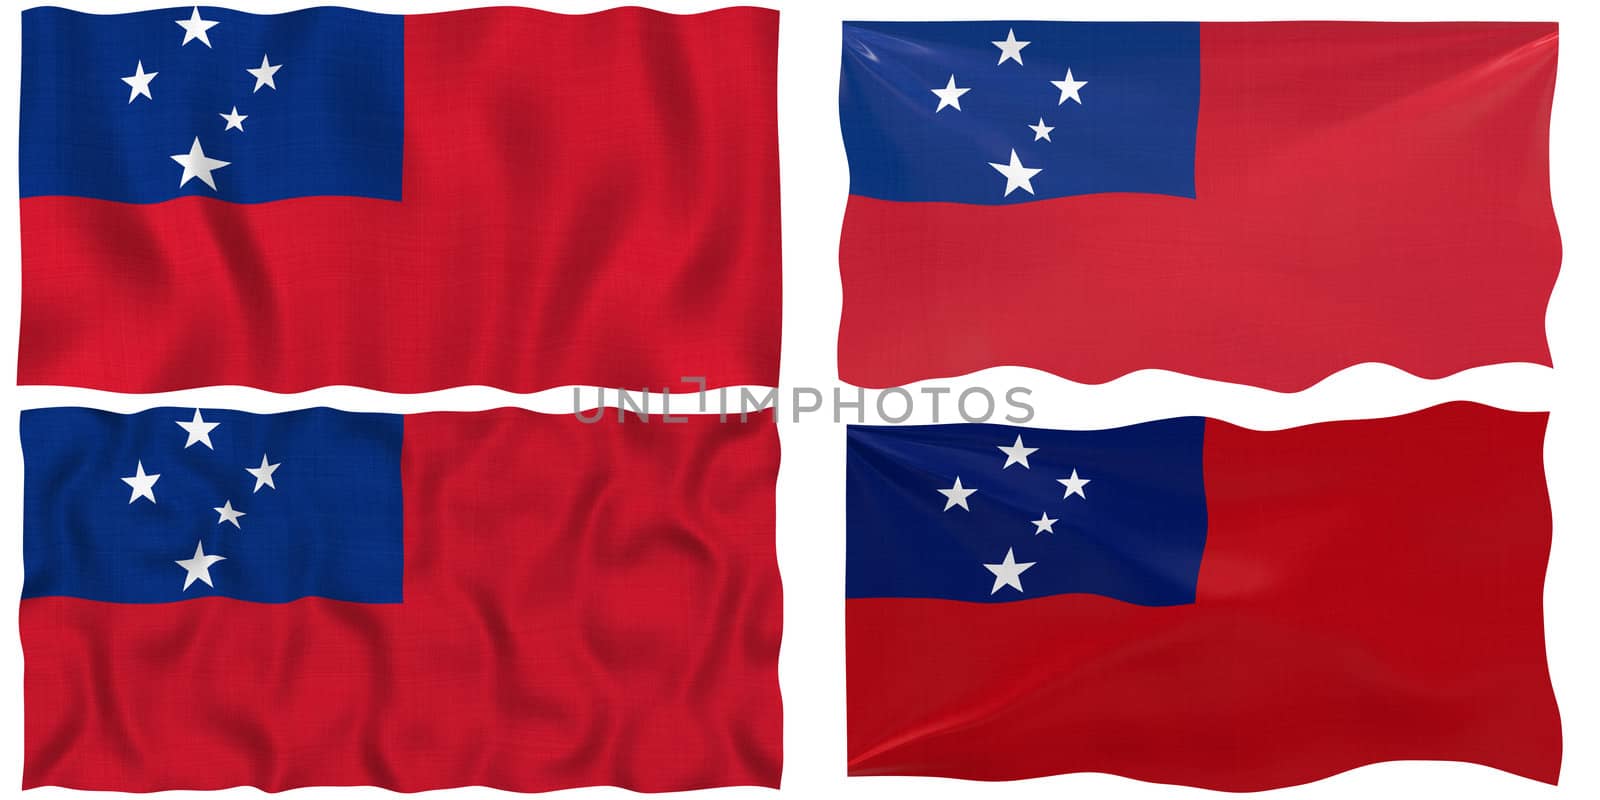 Great Image of the Flag of Samoa